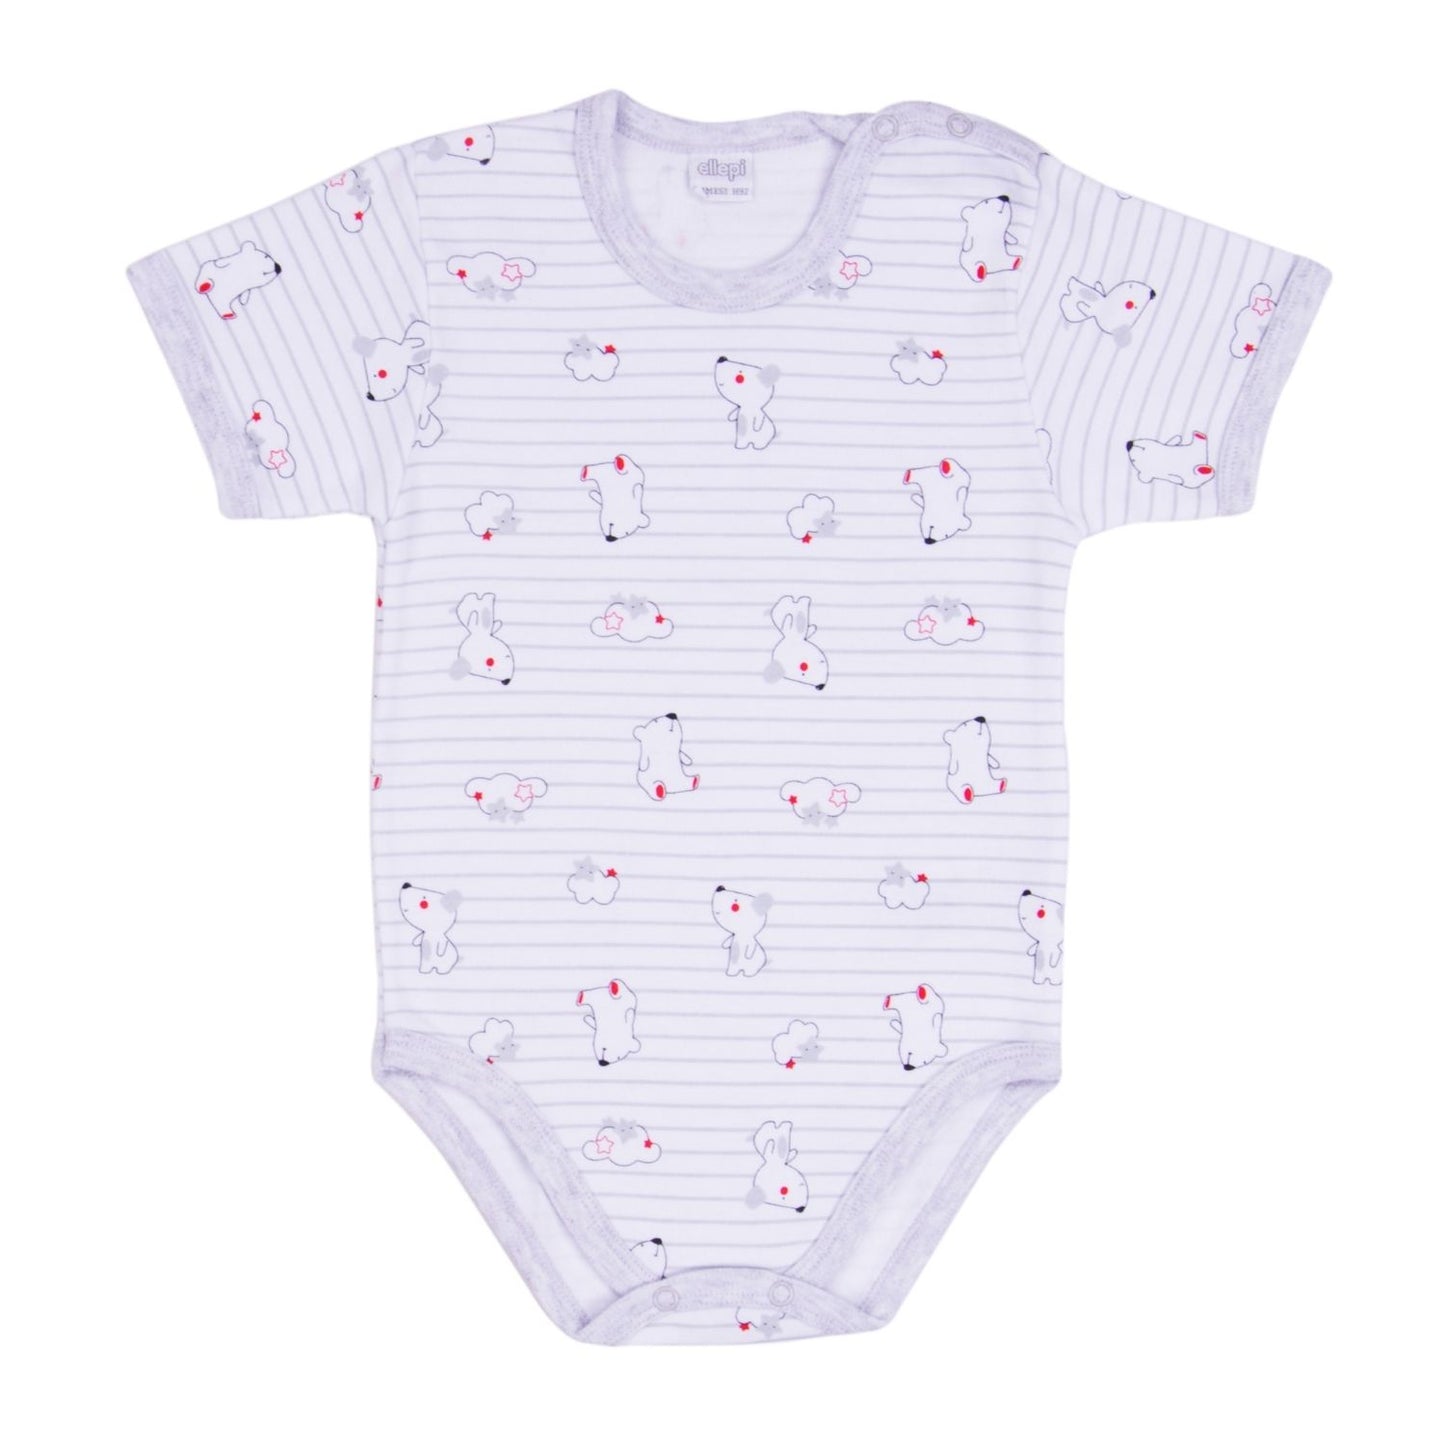 Ellepi - 2 Bodysuits with opening on the shoulder and short sleeves, 100% gray cotton